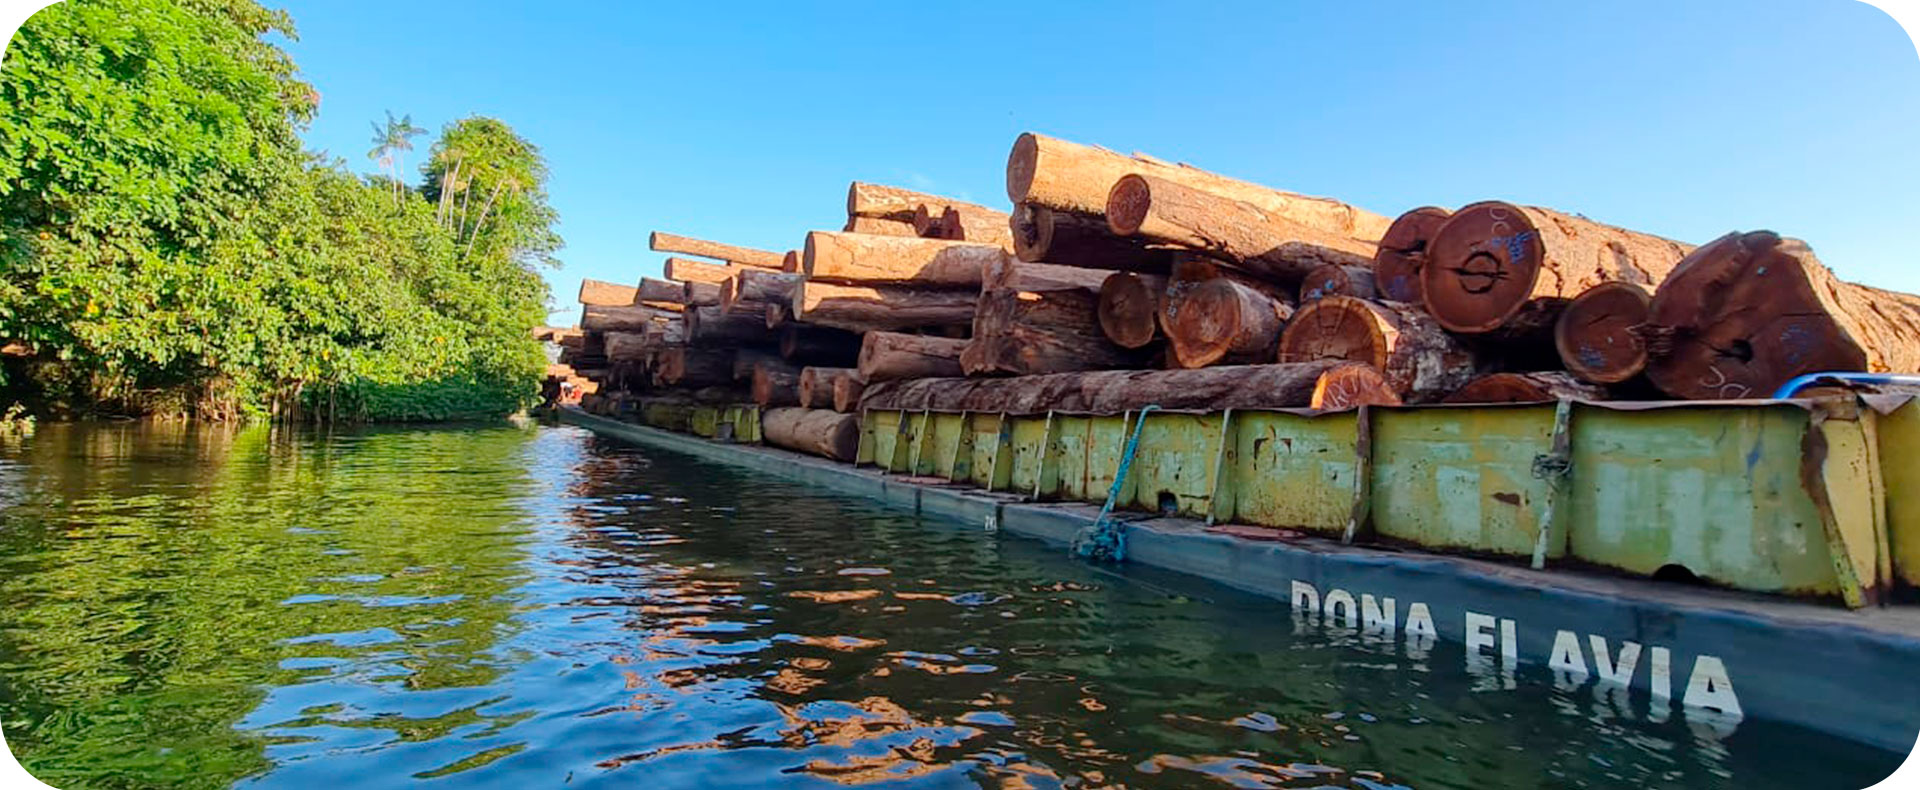 Transportation of logs from sustainable management in the Jutaituba REDD+ Project area.